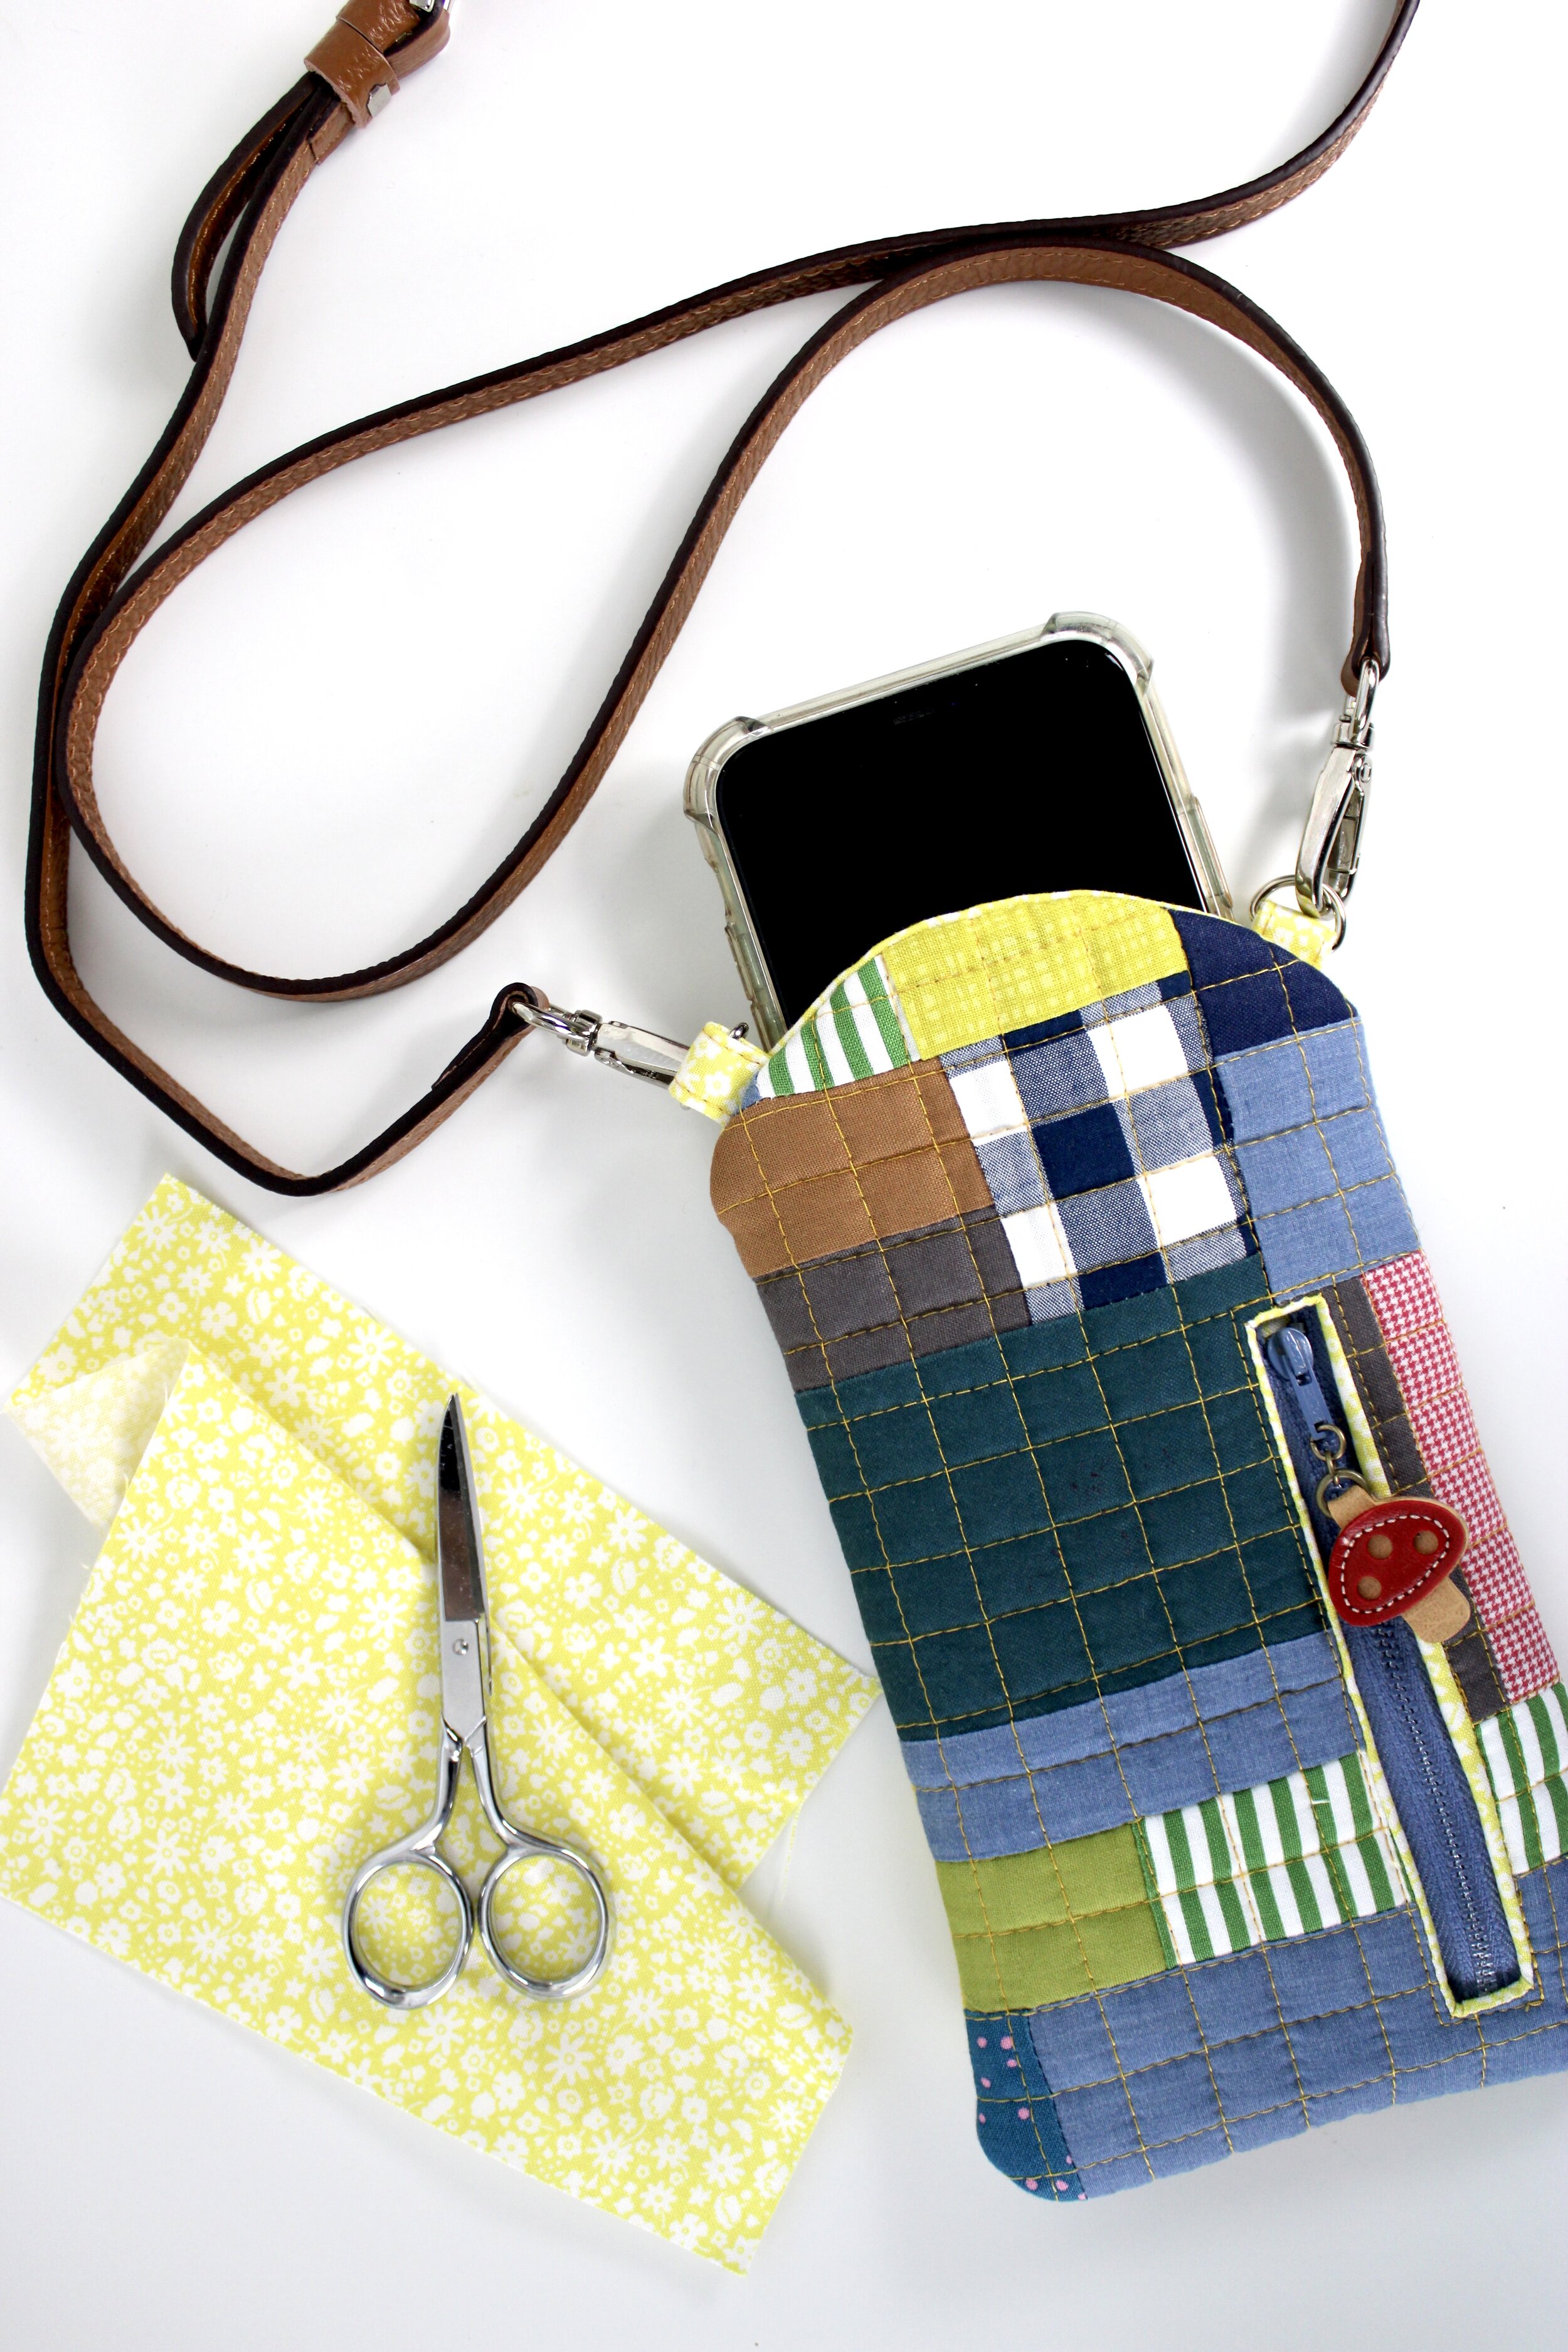 Cell Phone/Gadget Bag | I found this Cell Phone bag pattern … | Flickr